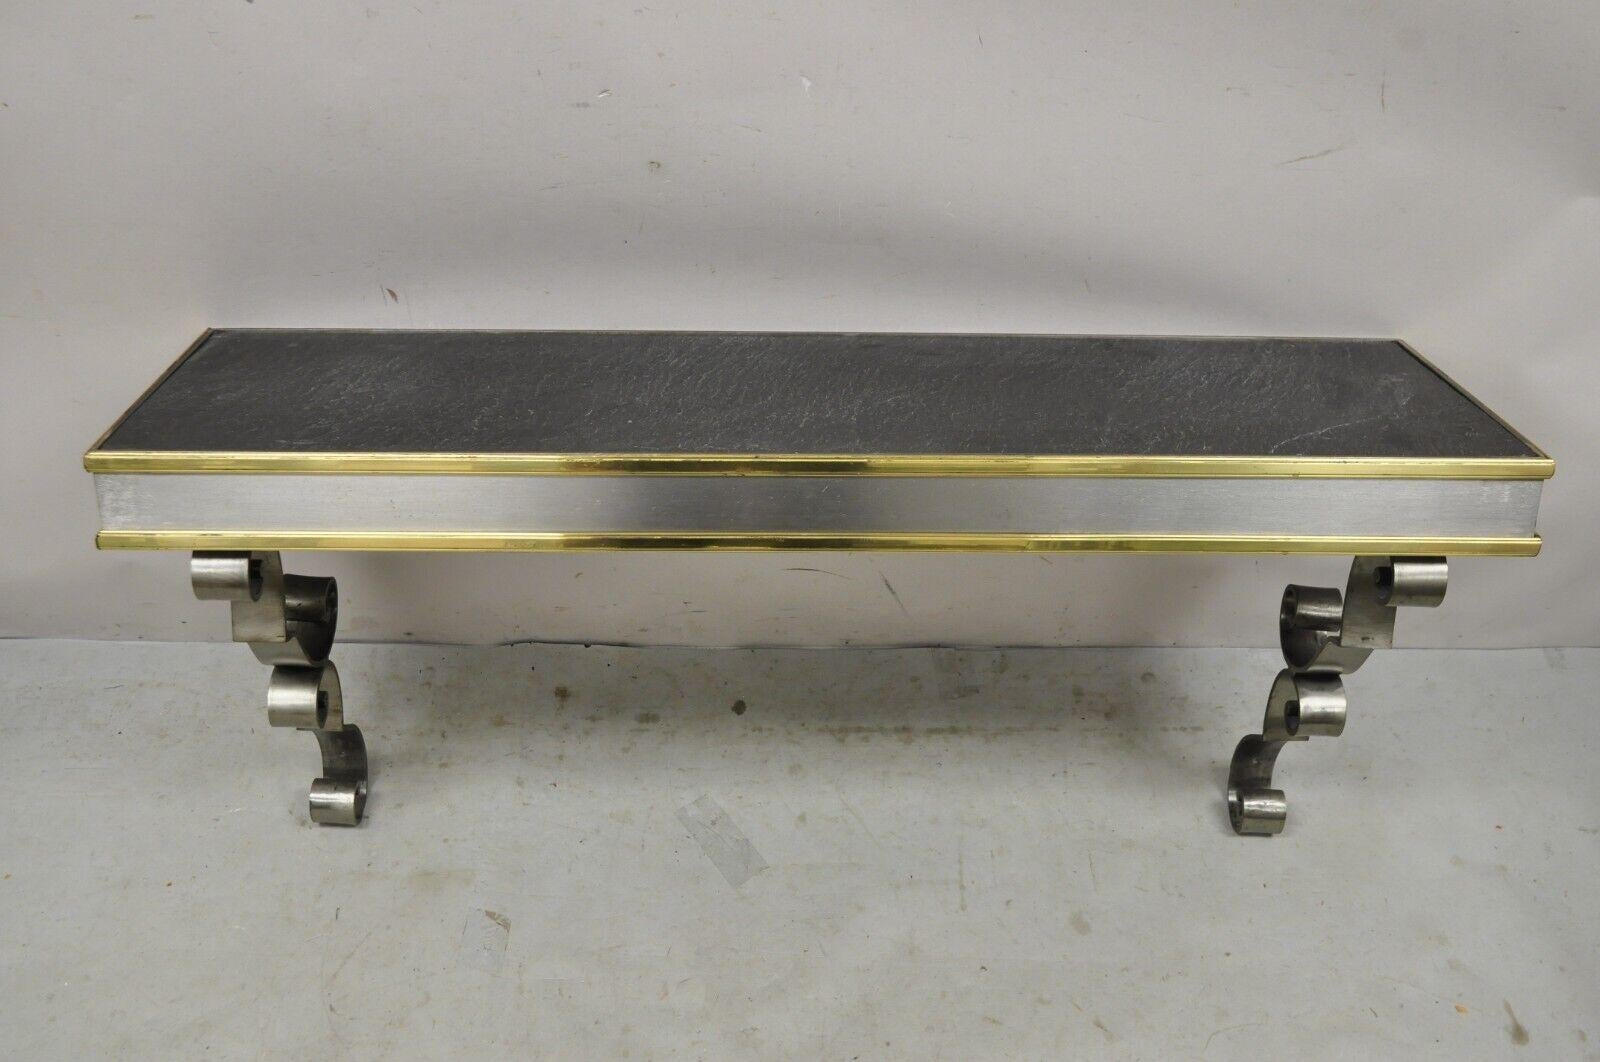 Vintage Italian Regency Steel and Brass Wall Mount Console Table with Slate Top. Item features has a Rectangular inset slate top, stool metal frame, brass accents, scrolling supports, very nice vintage item, quality Italian craftsmanship, great